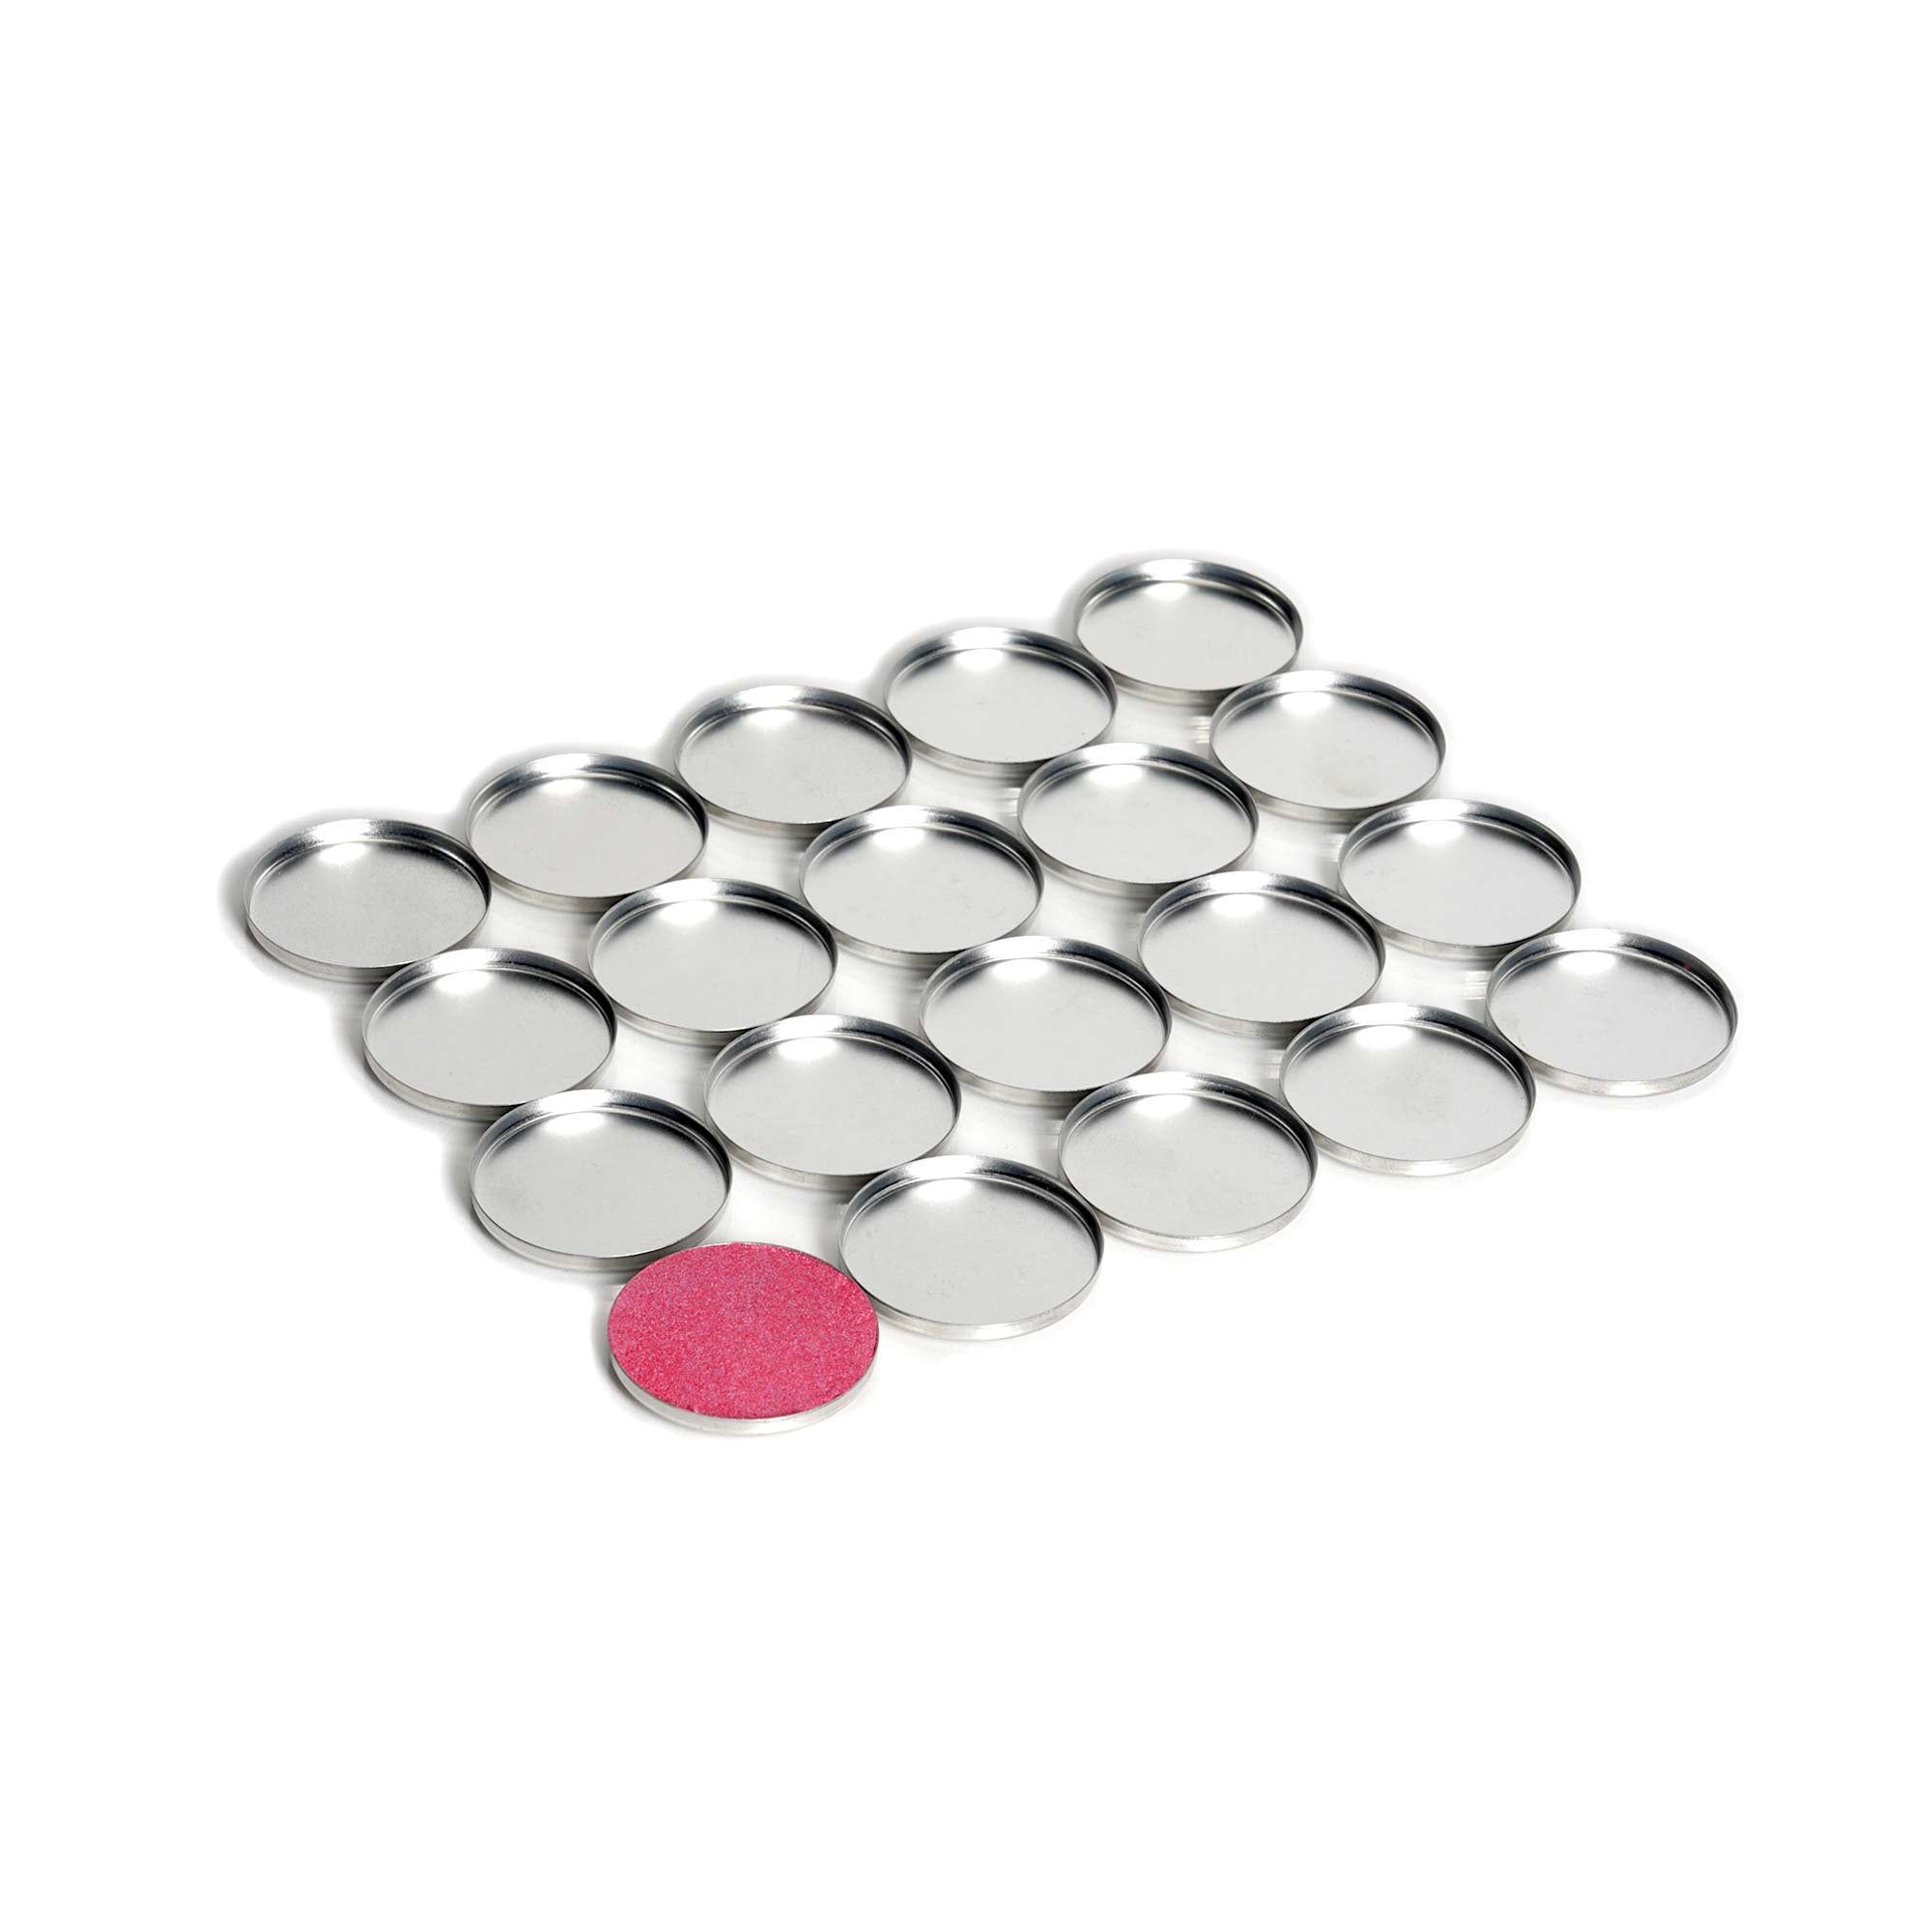 FIXY Small Empty Magnetic Makeup Palette w/ Mirror - 5 PACK – FIXY Makeup